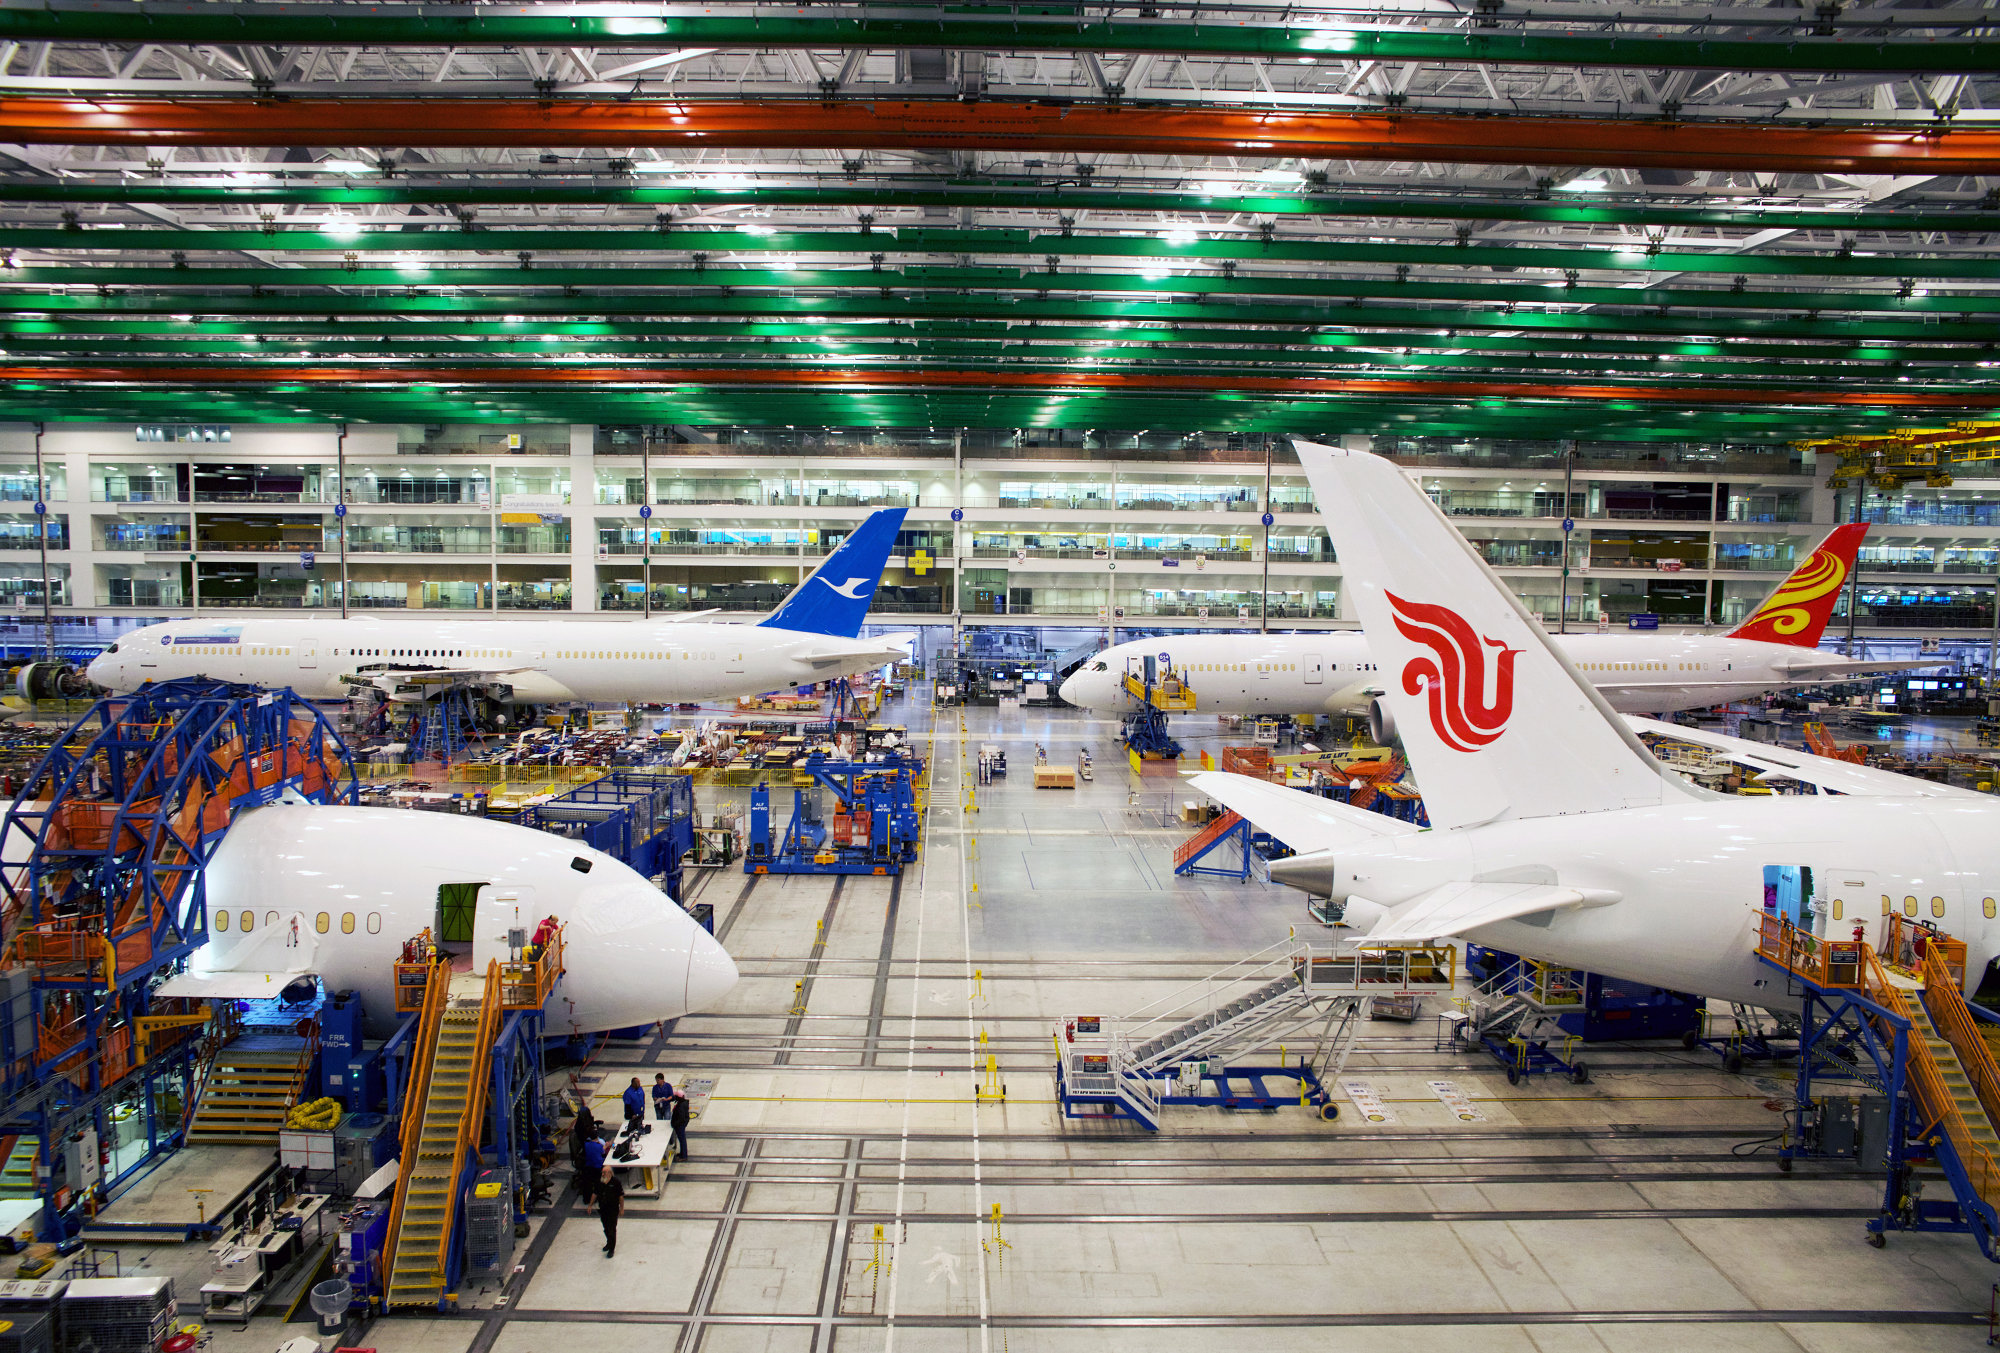 Boeing Co. Dreamliner 787 planes sit on the production line at the company's final assembly facility in North Charleston, South Carolina.